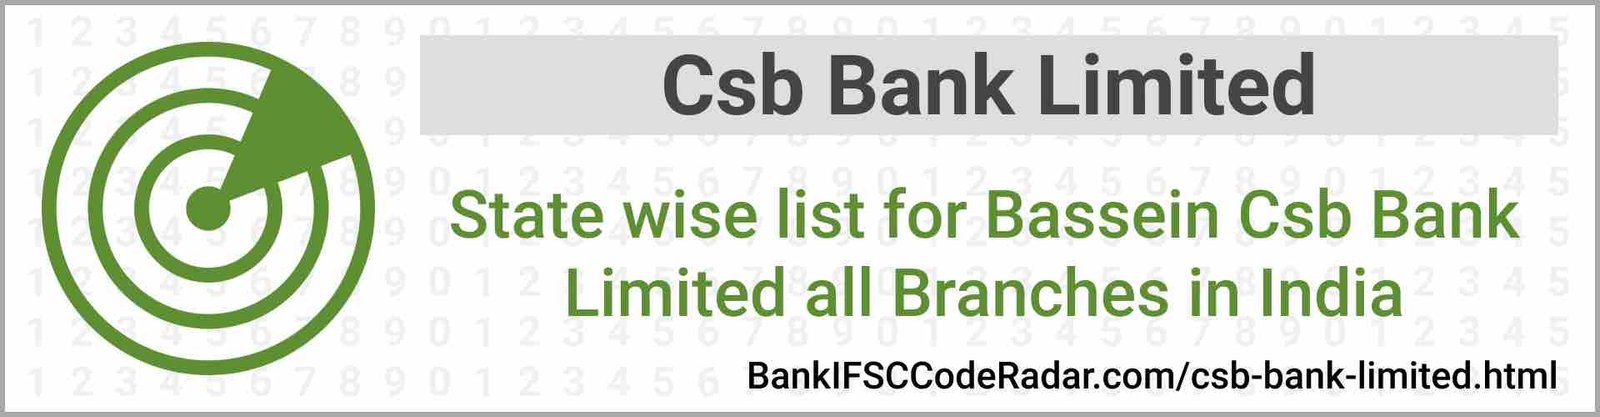 Csb Bank Limited All Branches India